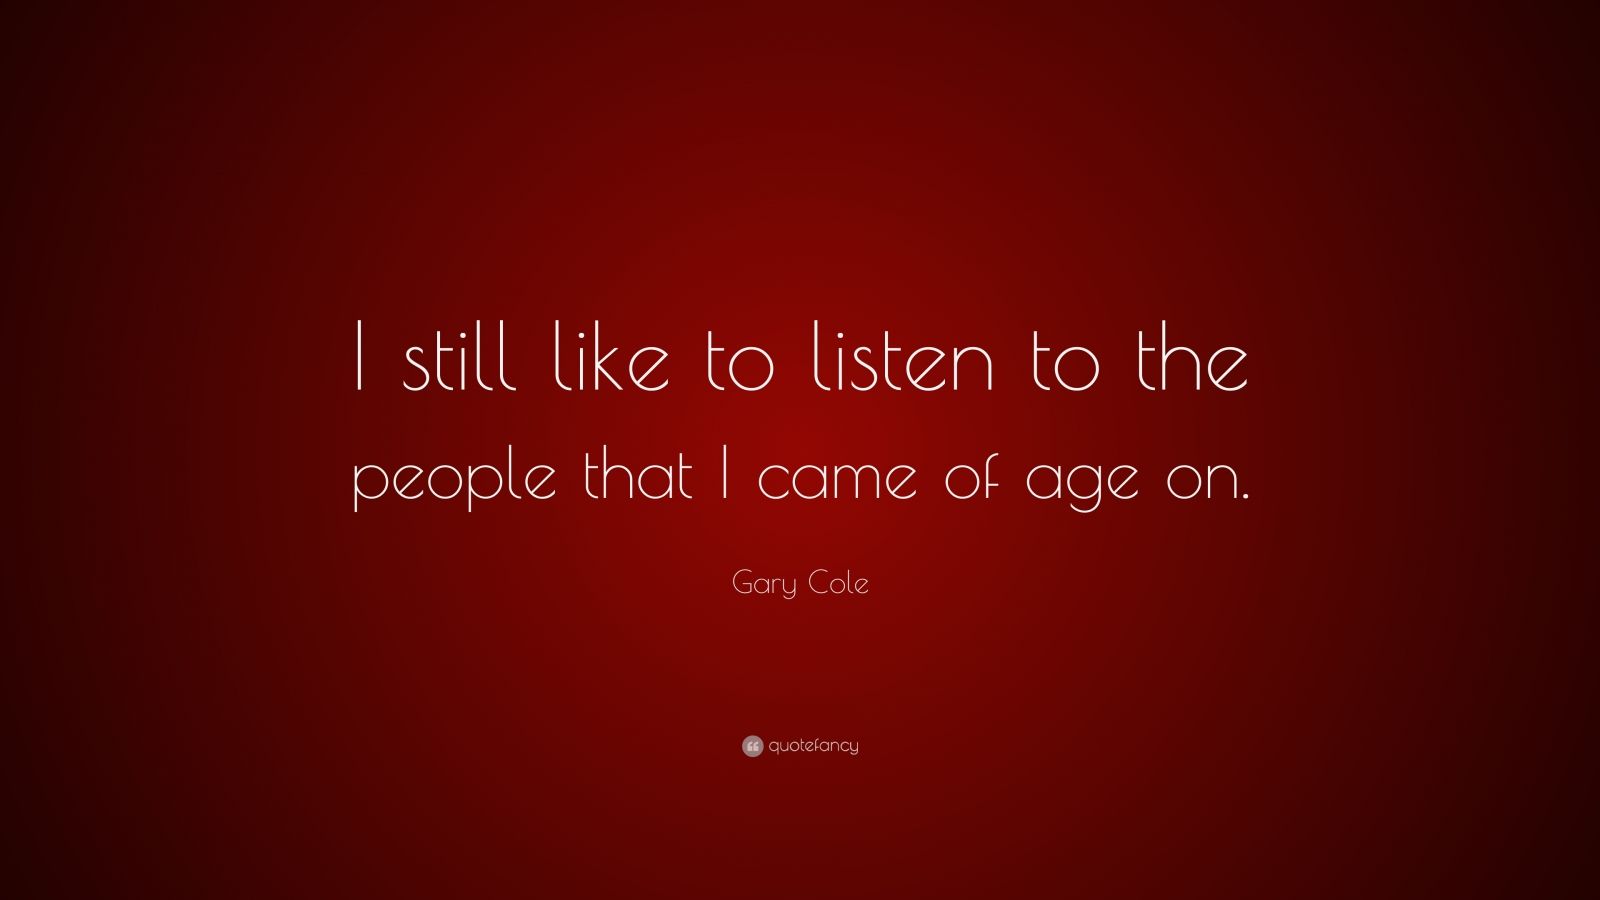 Gary Cole Quote: “I still like to listen to the people that I came of ...